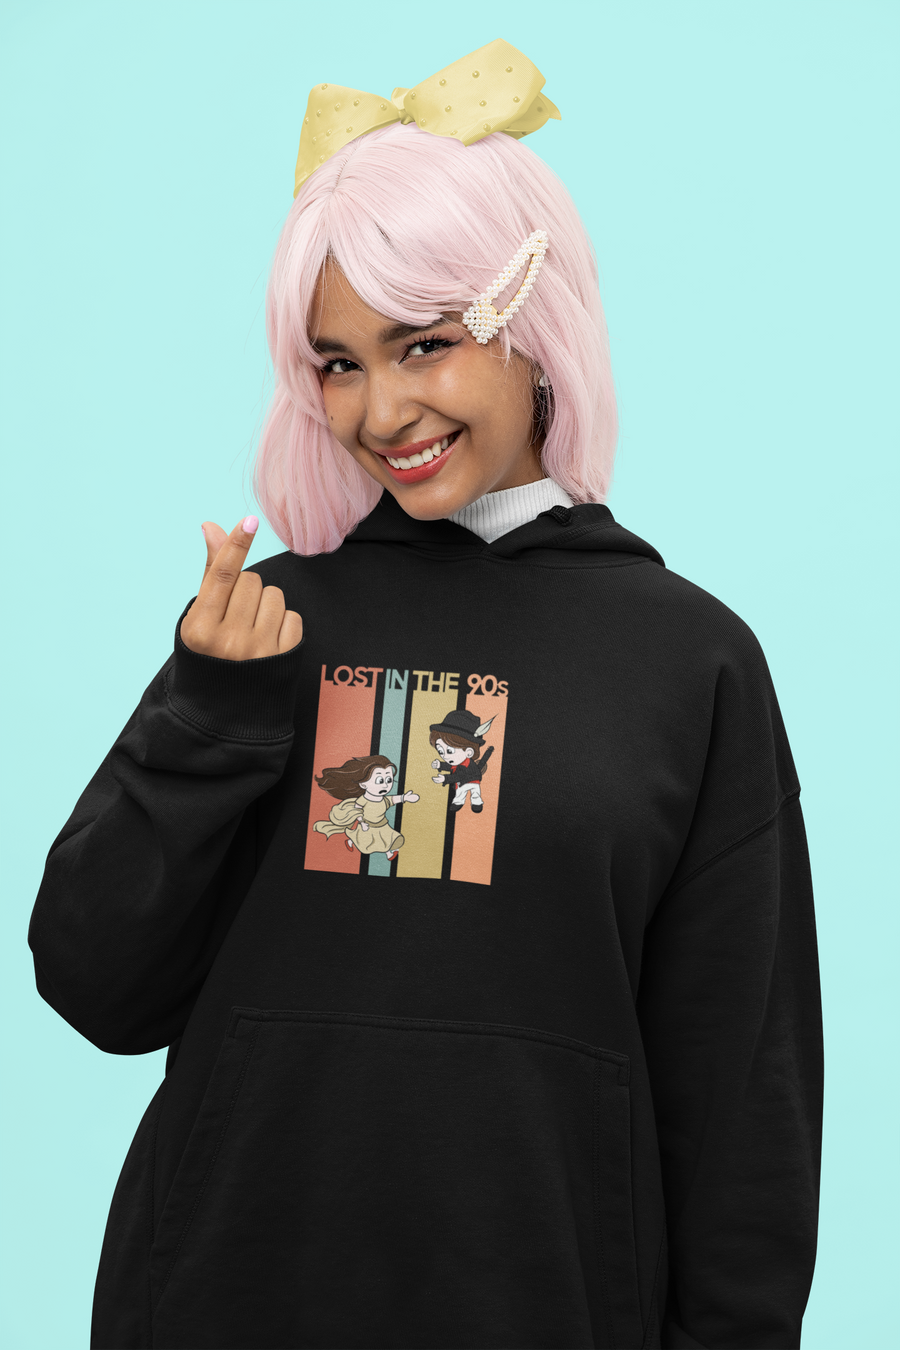 Lost in the 90s - Hoodie Nostalgia Fit